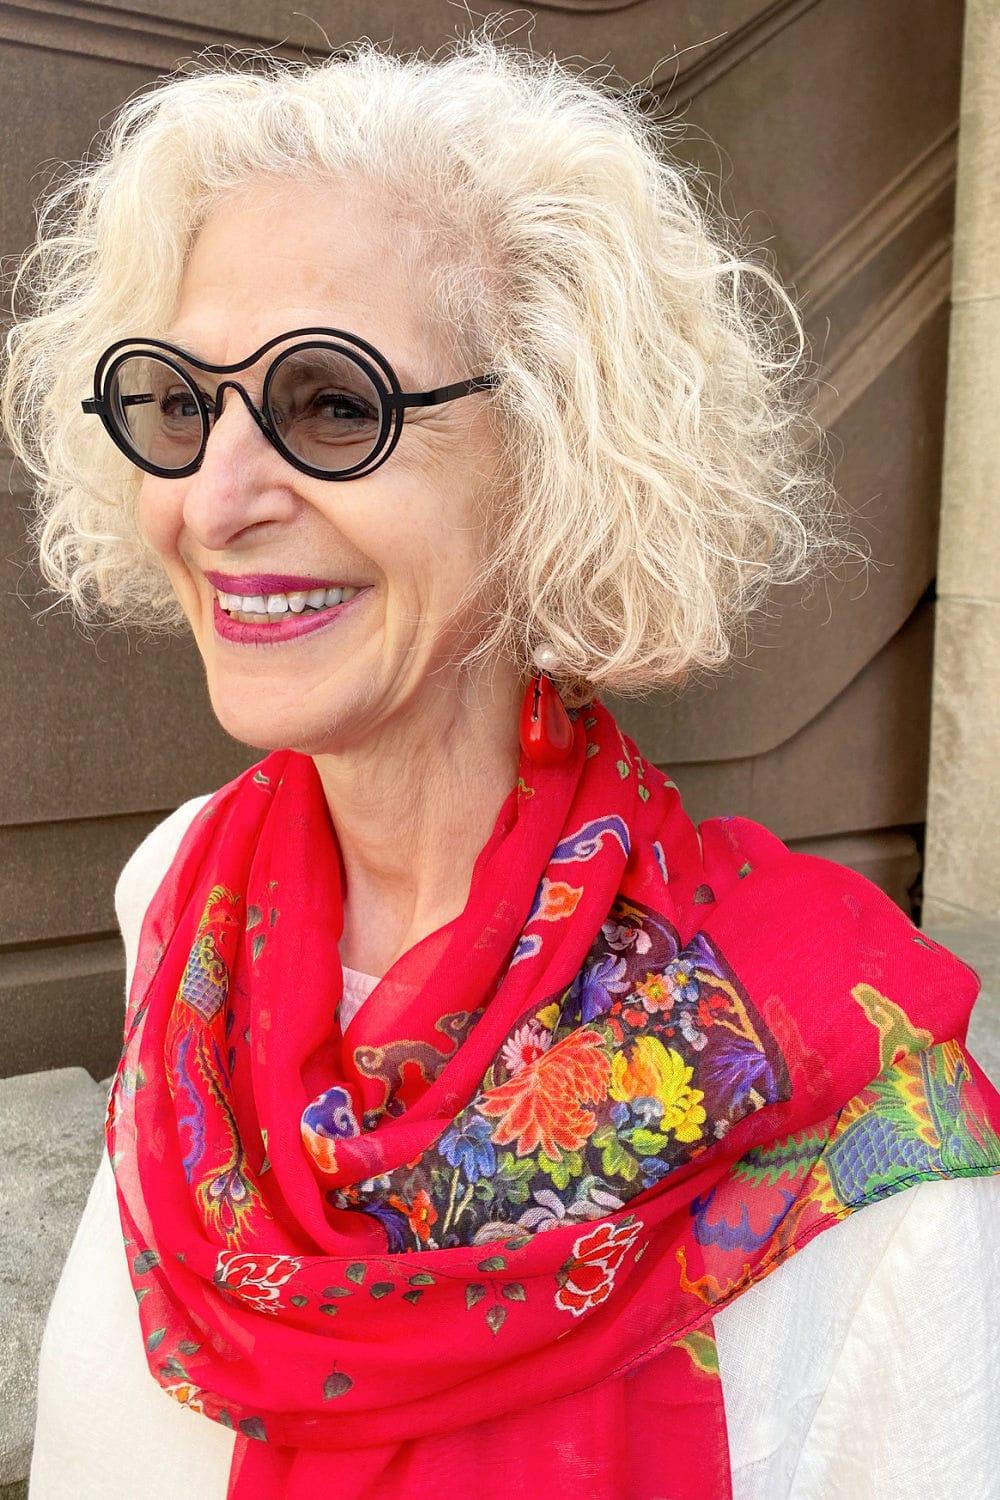 Very happy mature woman wearing a beautiful red drapy scarf over her shoulders. She is wearing red drop earrings and a white linen top with black rim glasses.